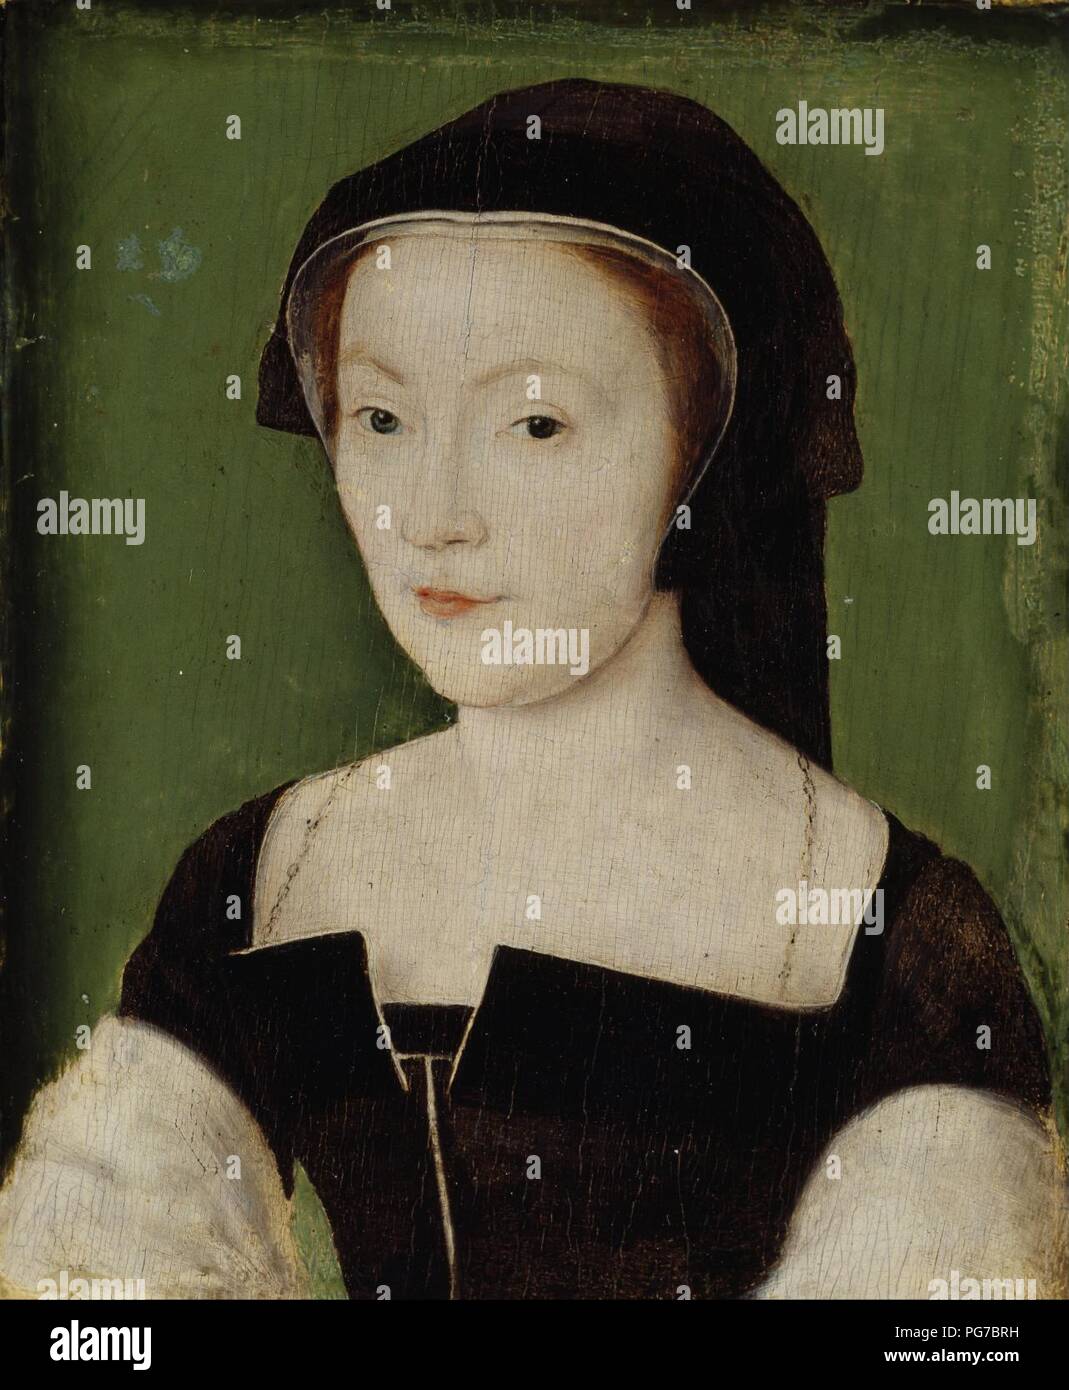 Attributed to Corneille de Lyon - Mary of Guise, 1515 - 1560. Queen of James V - Stock Photo